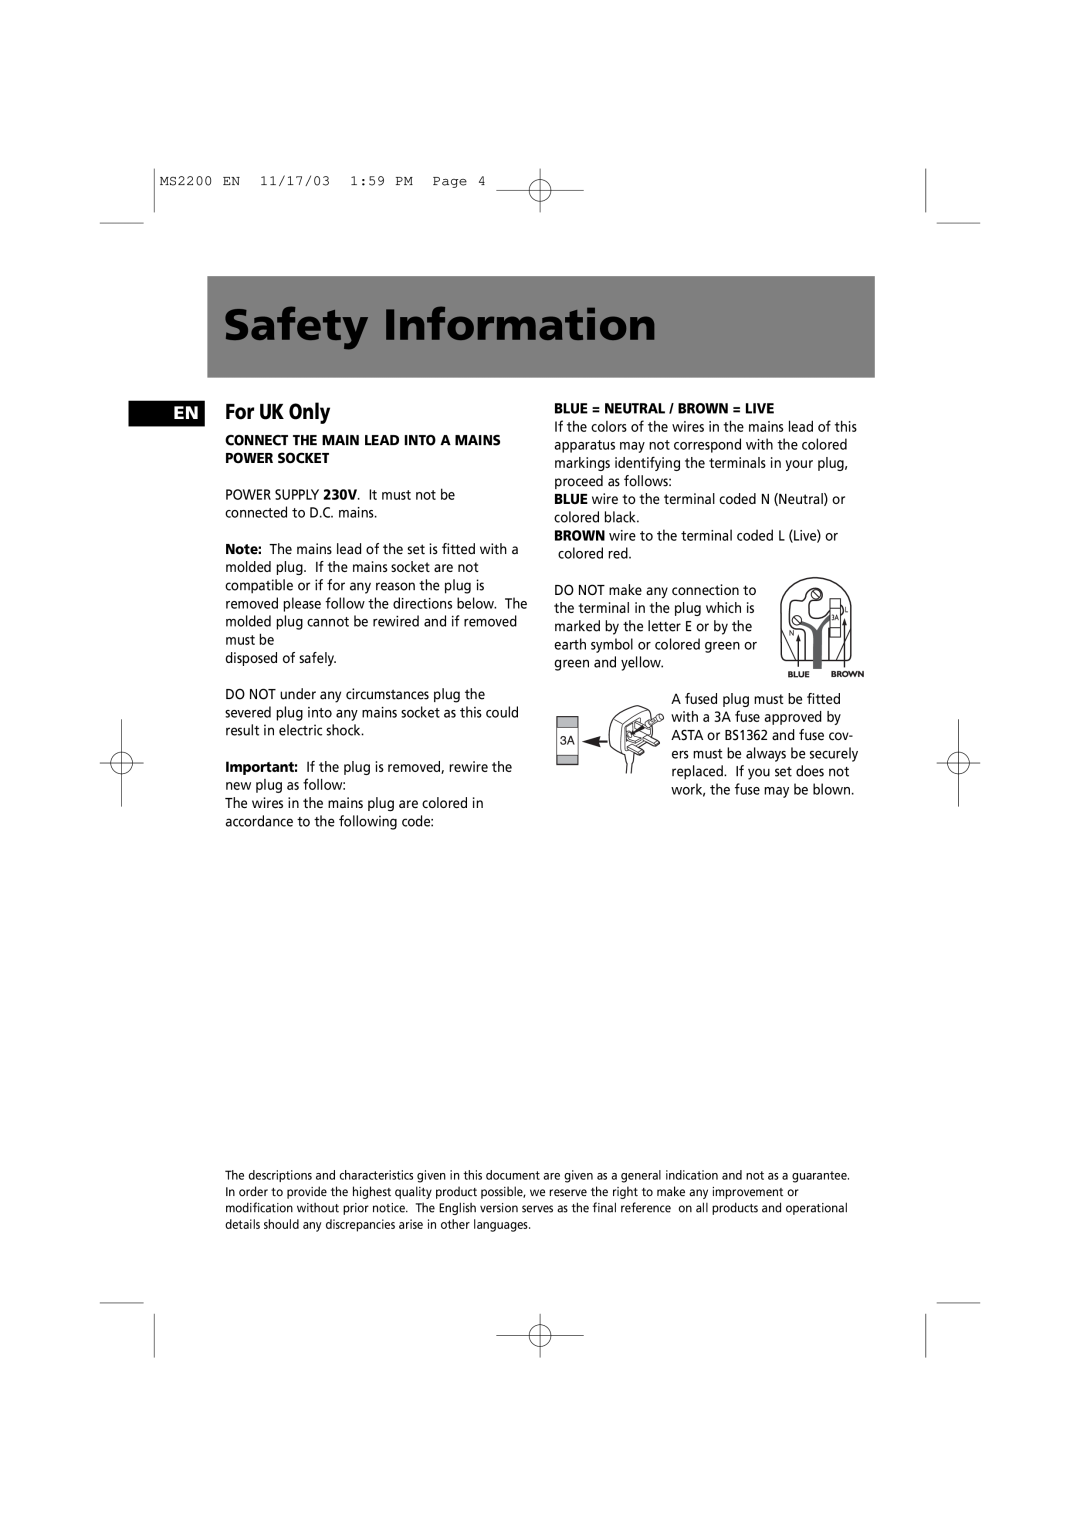 Technicolor - Thomson MS2200 manual Safety Information, EN For UK Only, Connect The Main Lead Into A Mains Power Socket 